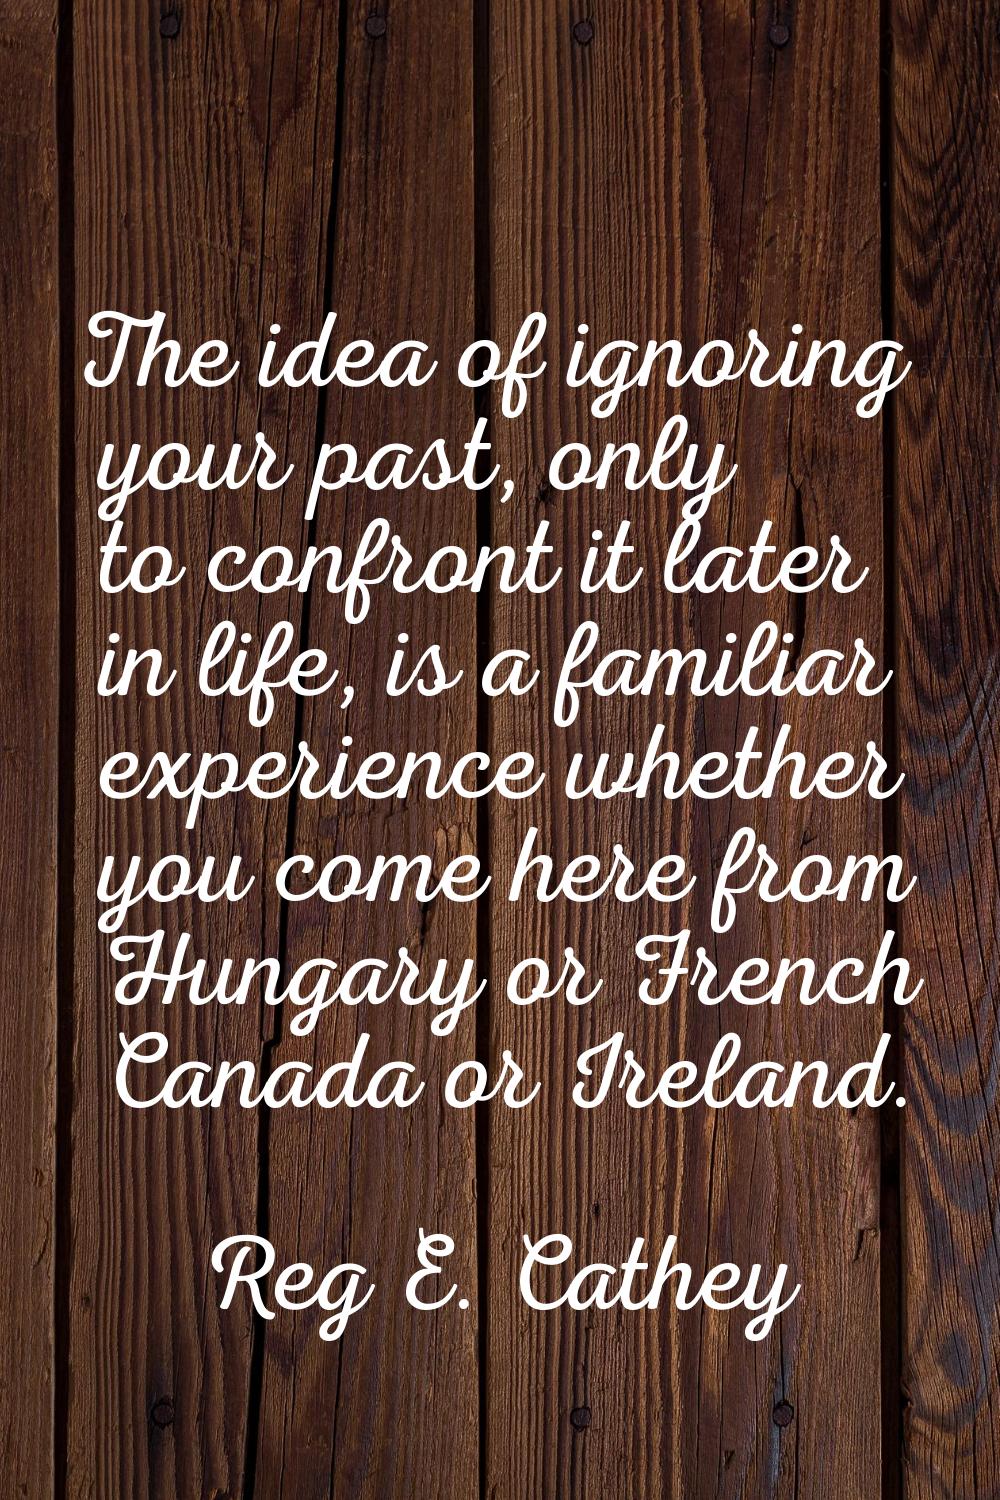 The idea of ignoring your past, only to confront it later in life, is a familiar experience whether